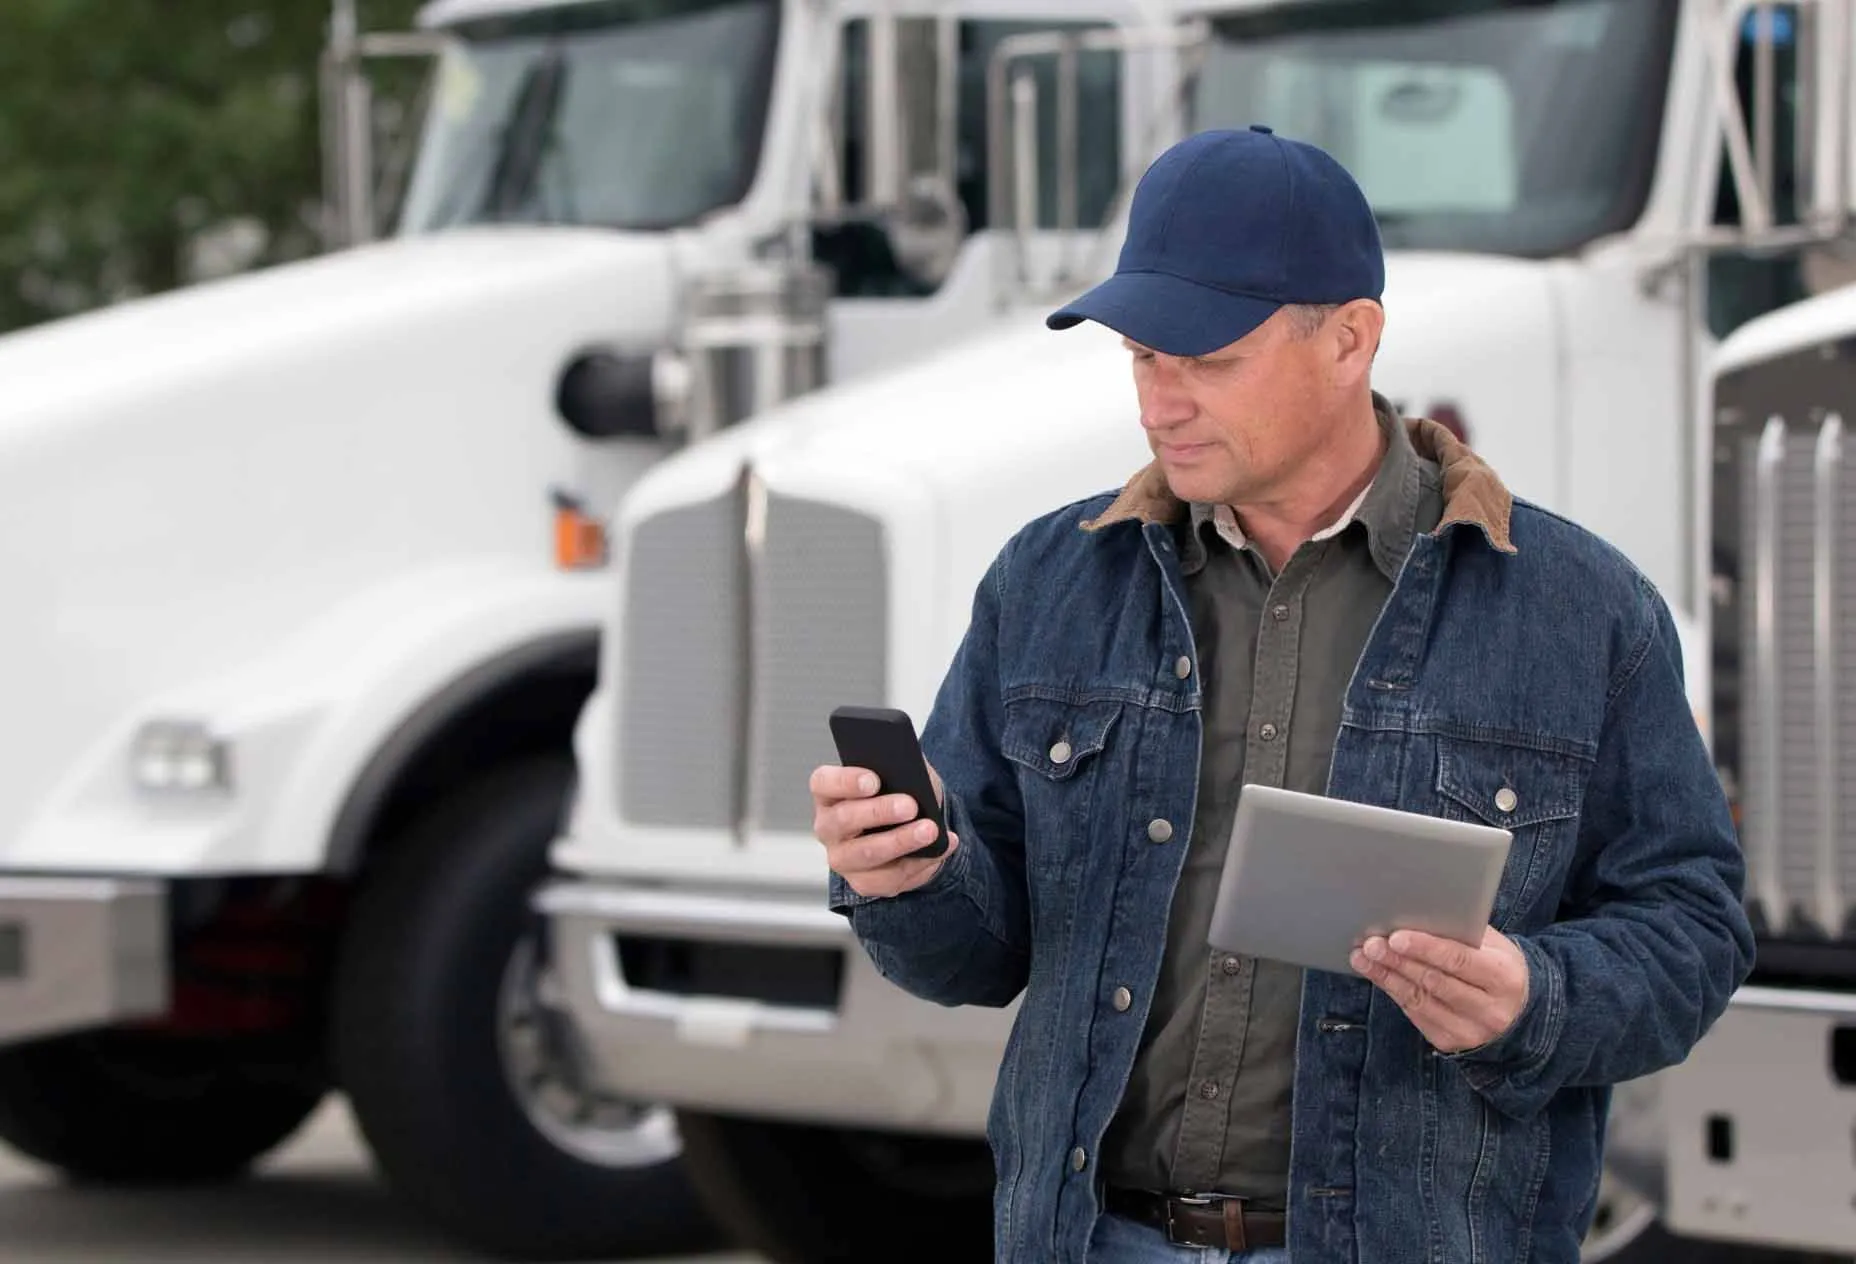 A ZMac carrier stands in front of his truck. He types on a cell phone with one hand while holding an iPad in the other.